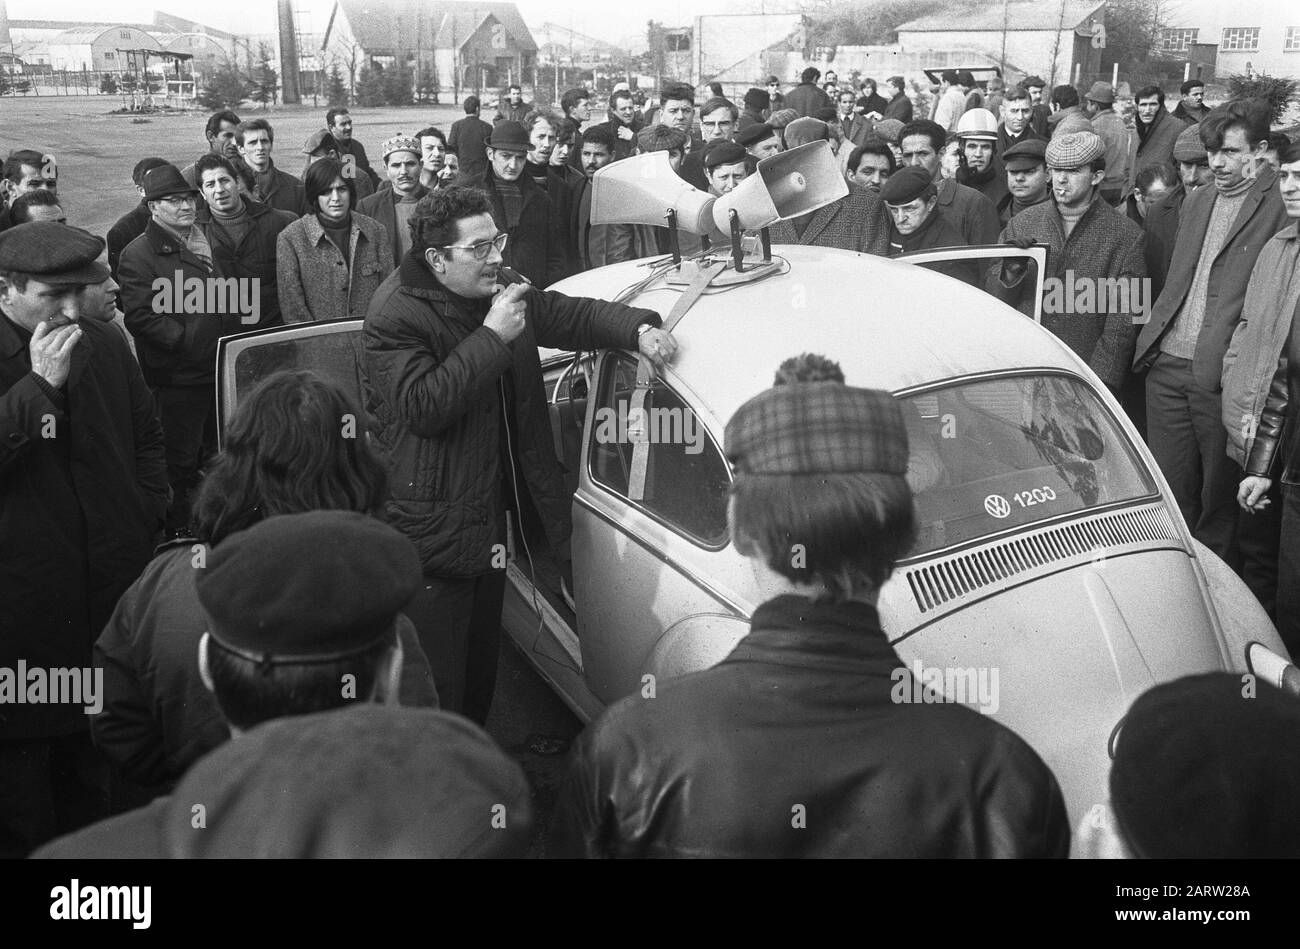 Strikes in Limburg (Belgium). Strike leader Gerard Siegers, working in the Winterslag mine, addresses the posters for the Zolder mine Date: 30 January 1970 Location: Belgium, Limburg Keywords: STRKINGS, Strike leaders Personal name: GERARD Stock Photo